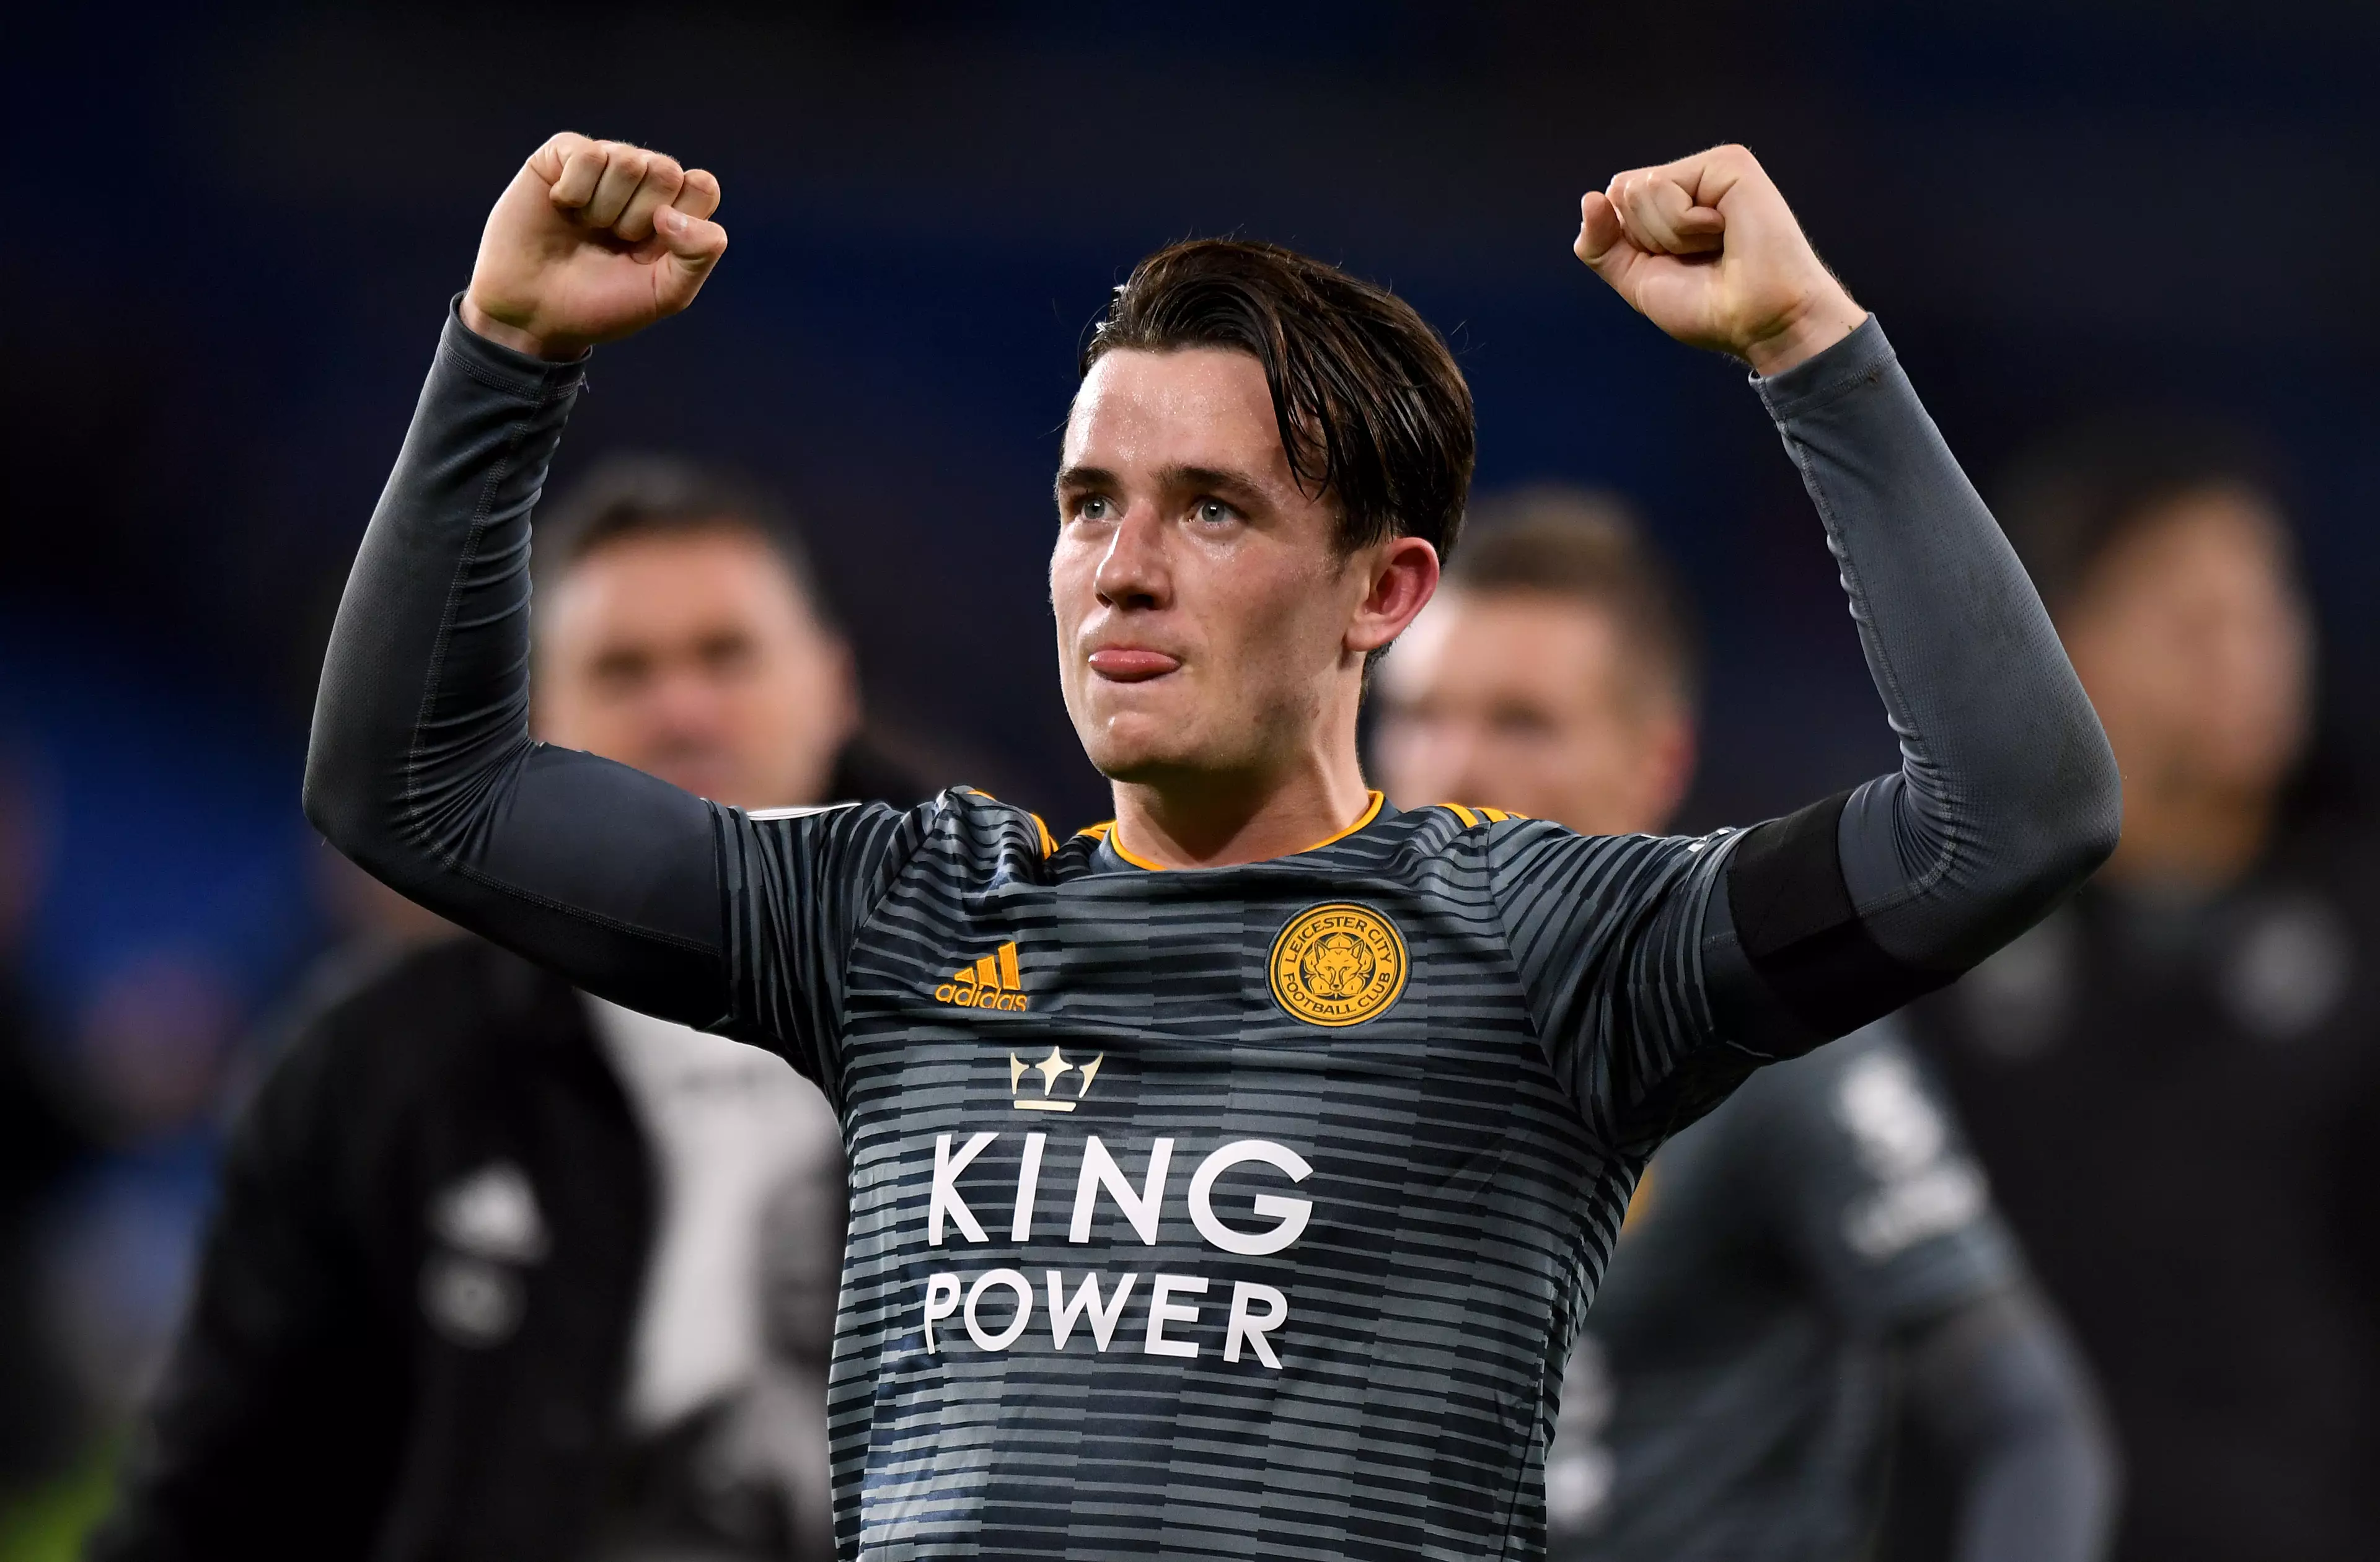 Chilwell has been excellent for Leicester. Image: PA Images